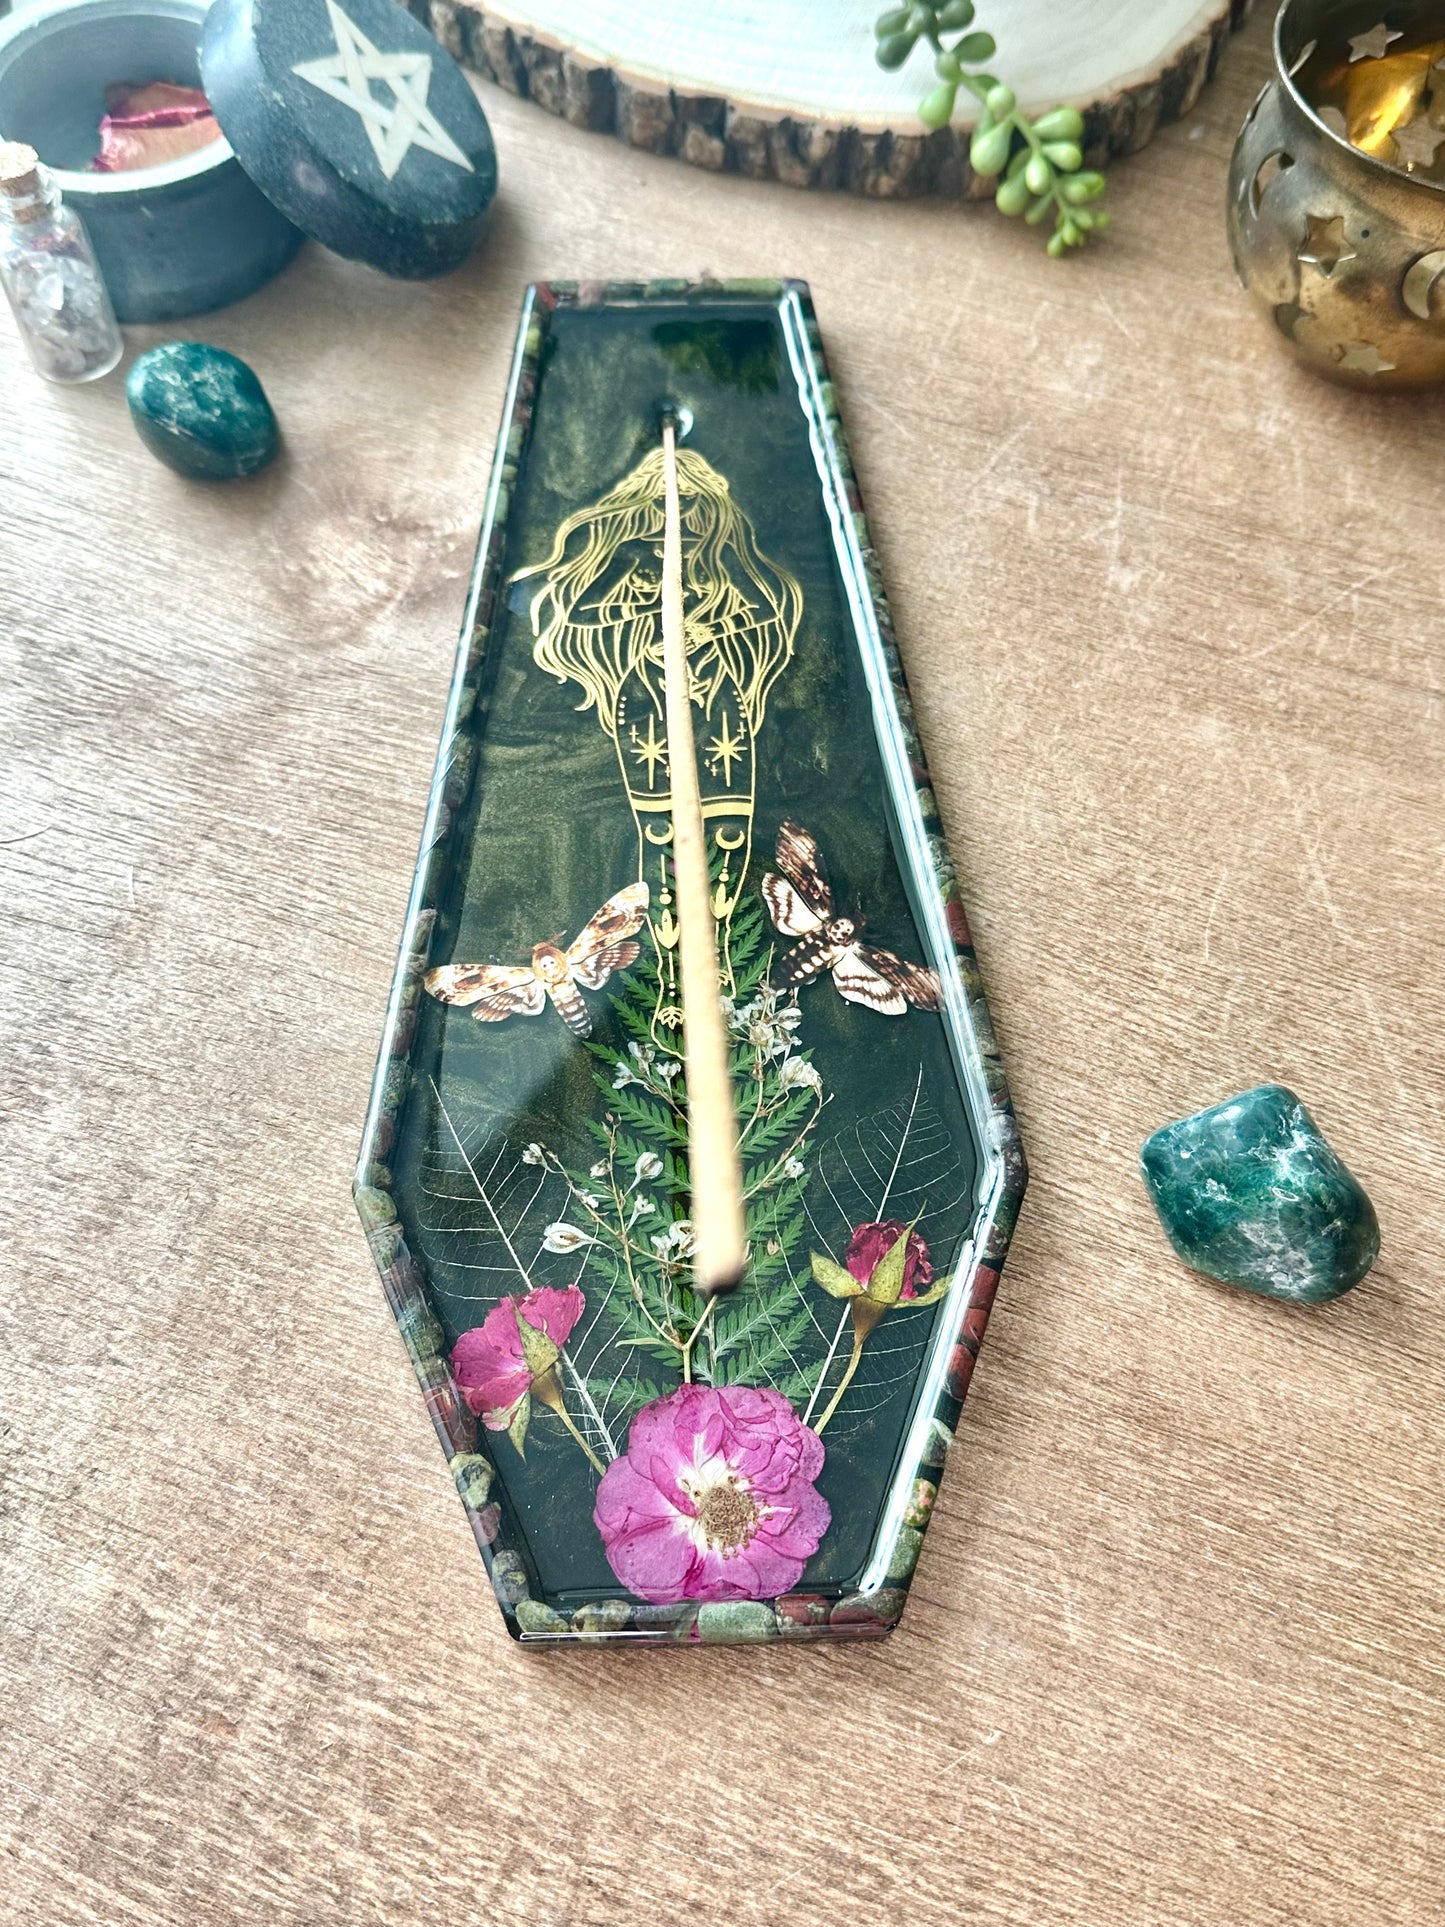 Bloodstone witch incense holder